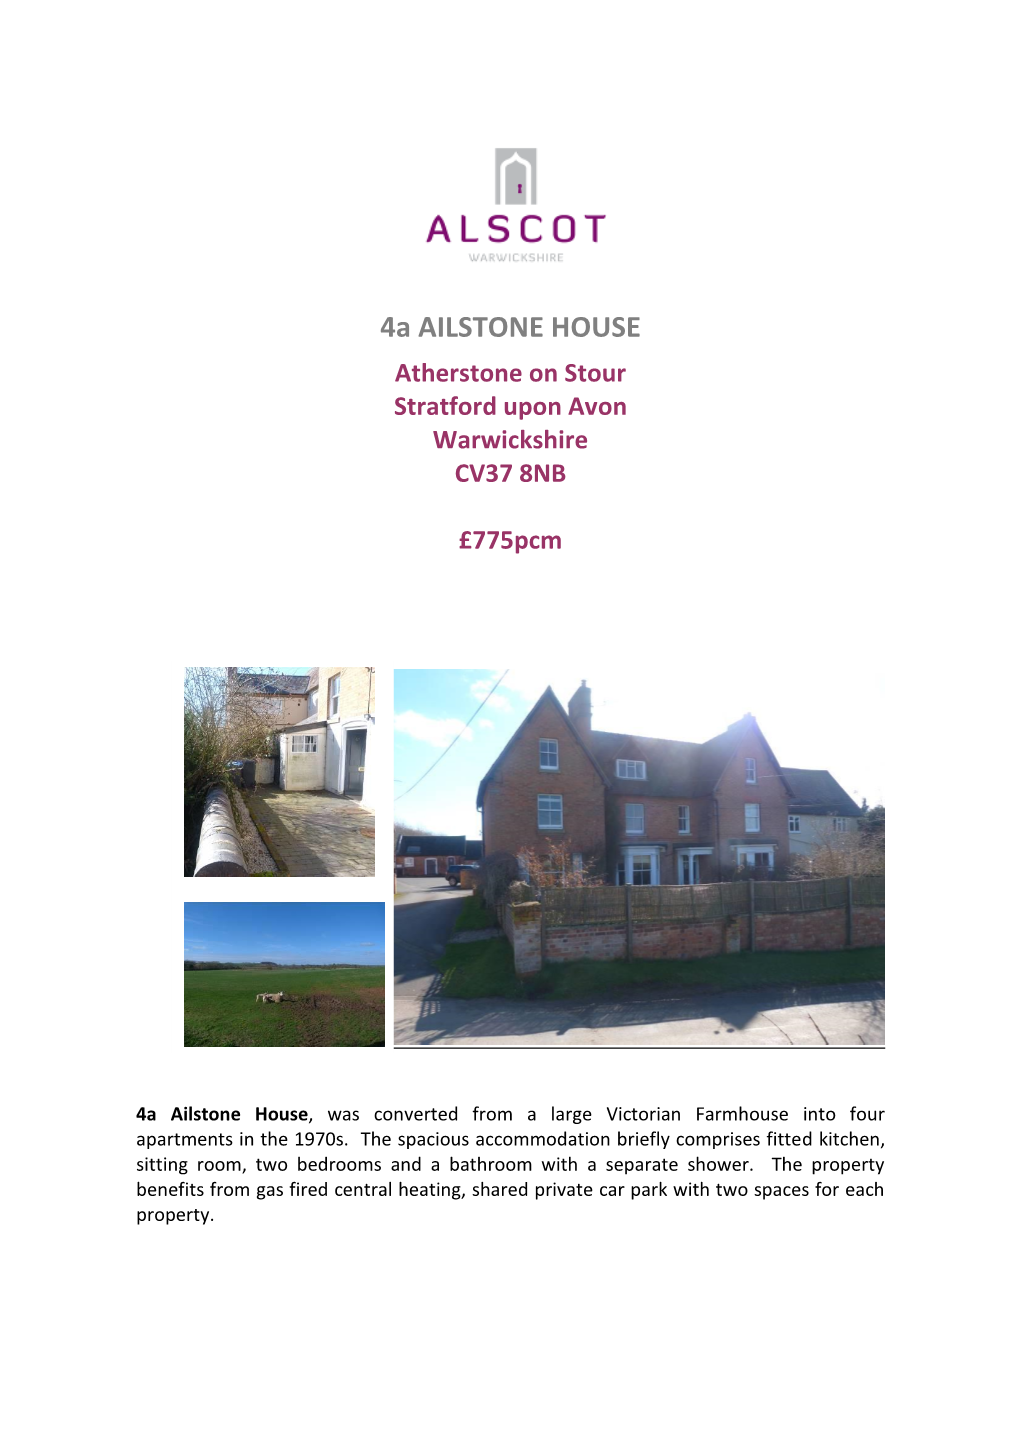 Alscot Estate to Keep Their Properties to a High Standard We Employ Our Own Building Team of Carpenters and Bricklayers